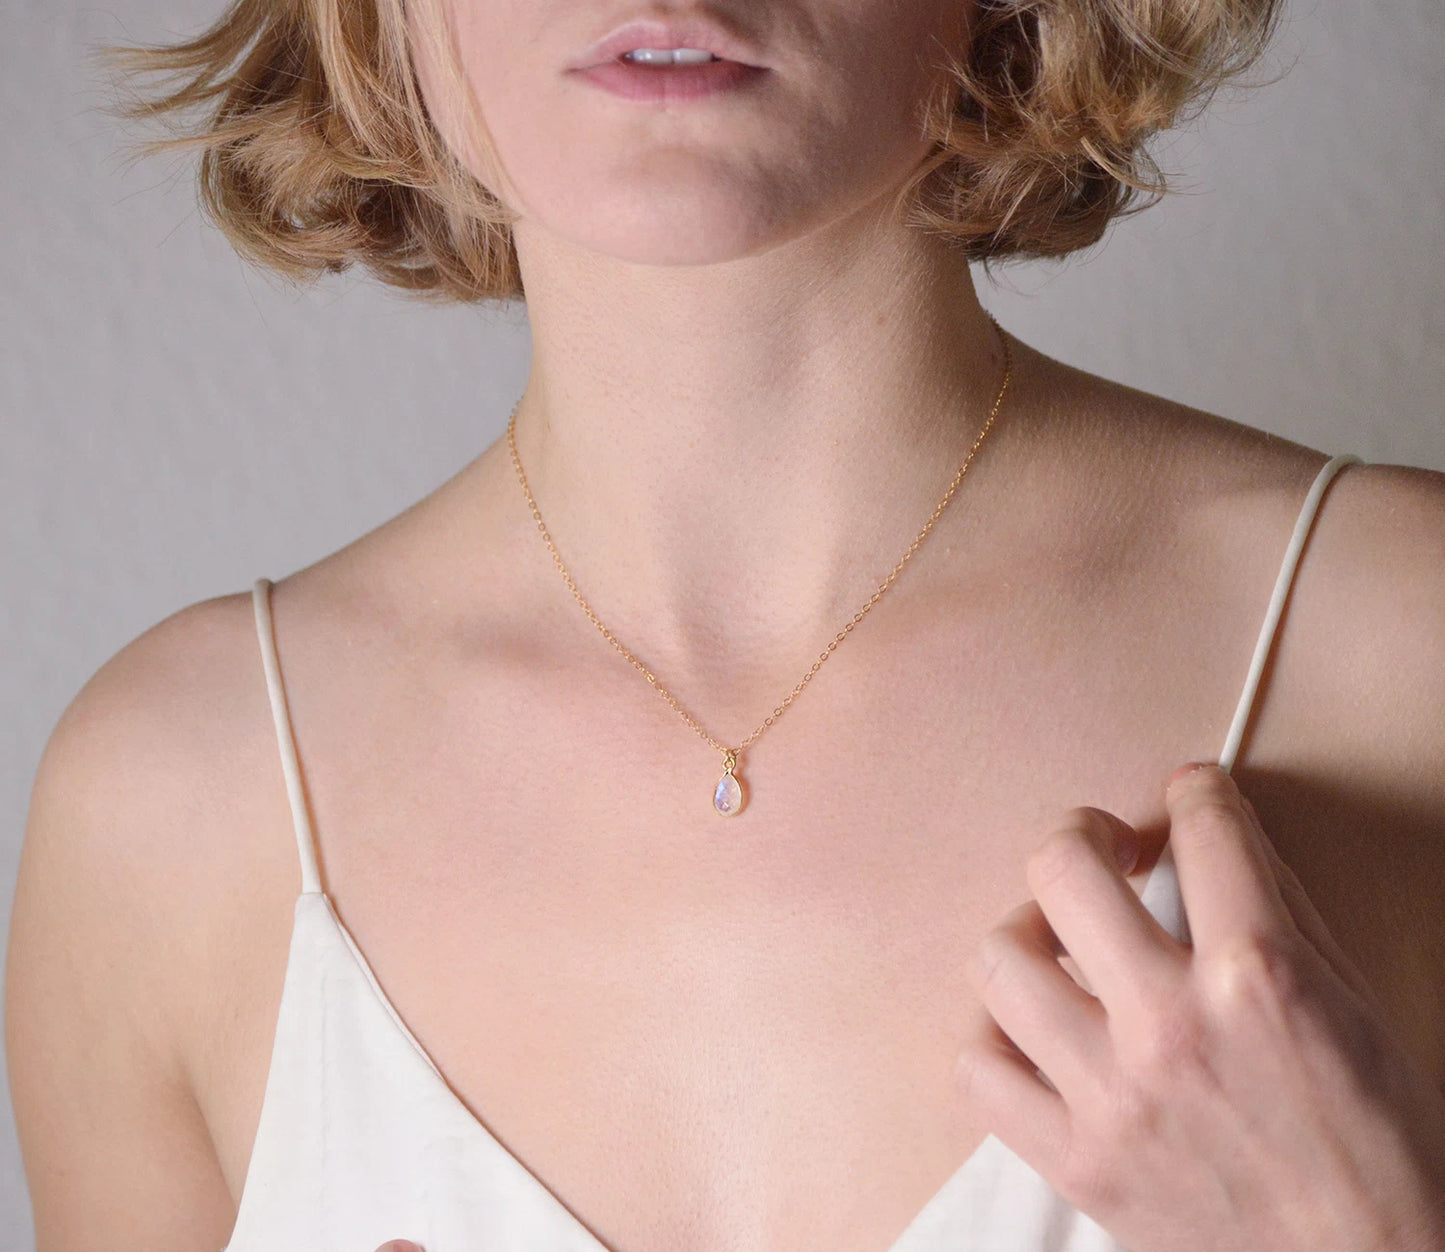 Moonstone Pendant with gold Necklace